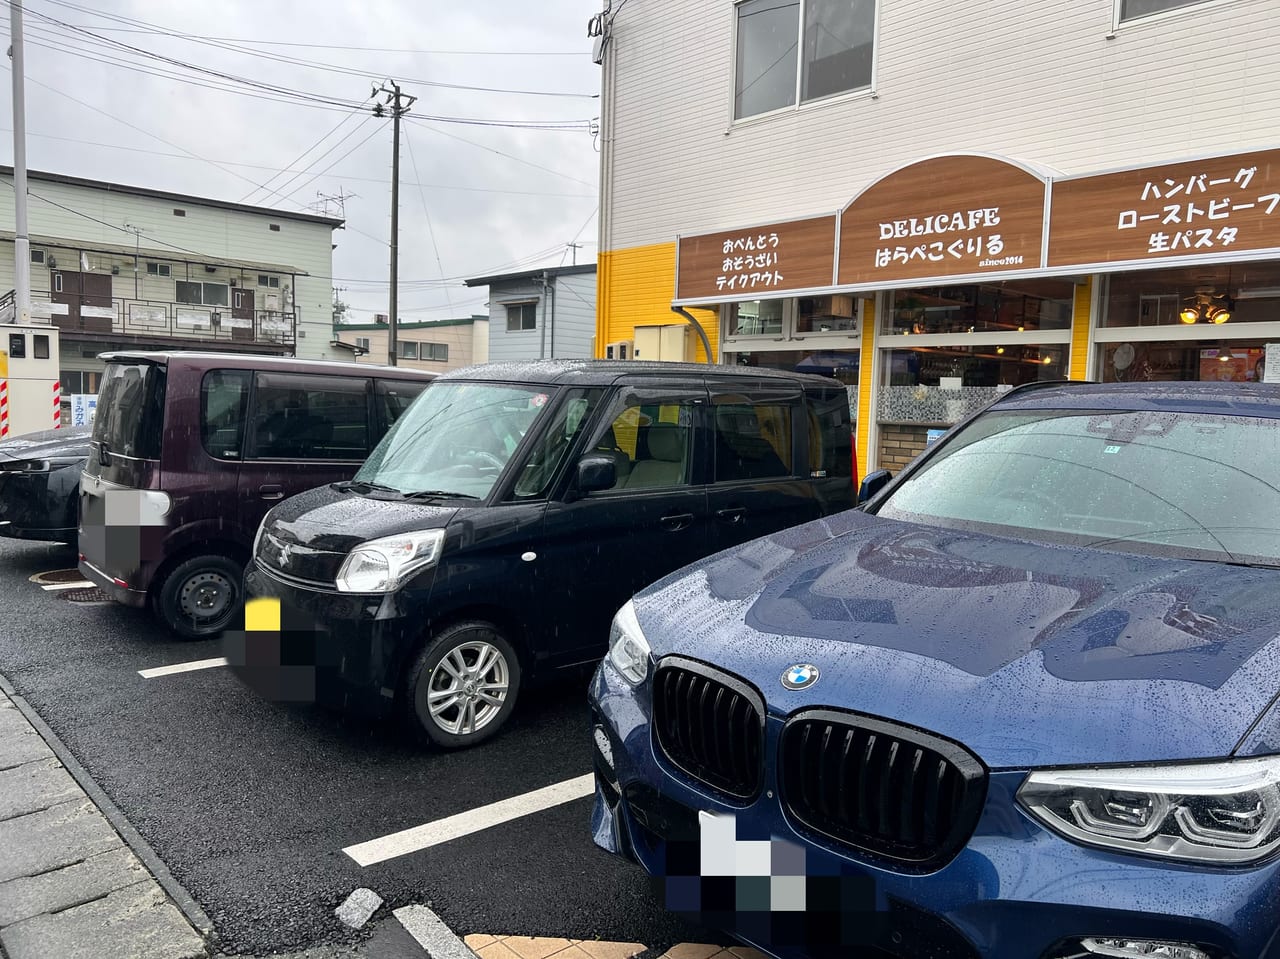 DELICAFEはらぺこぐりる駐車場